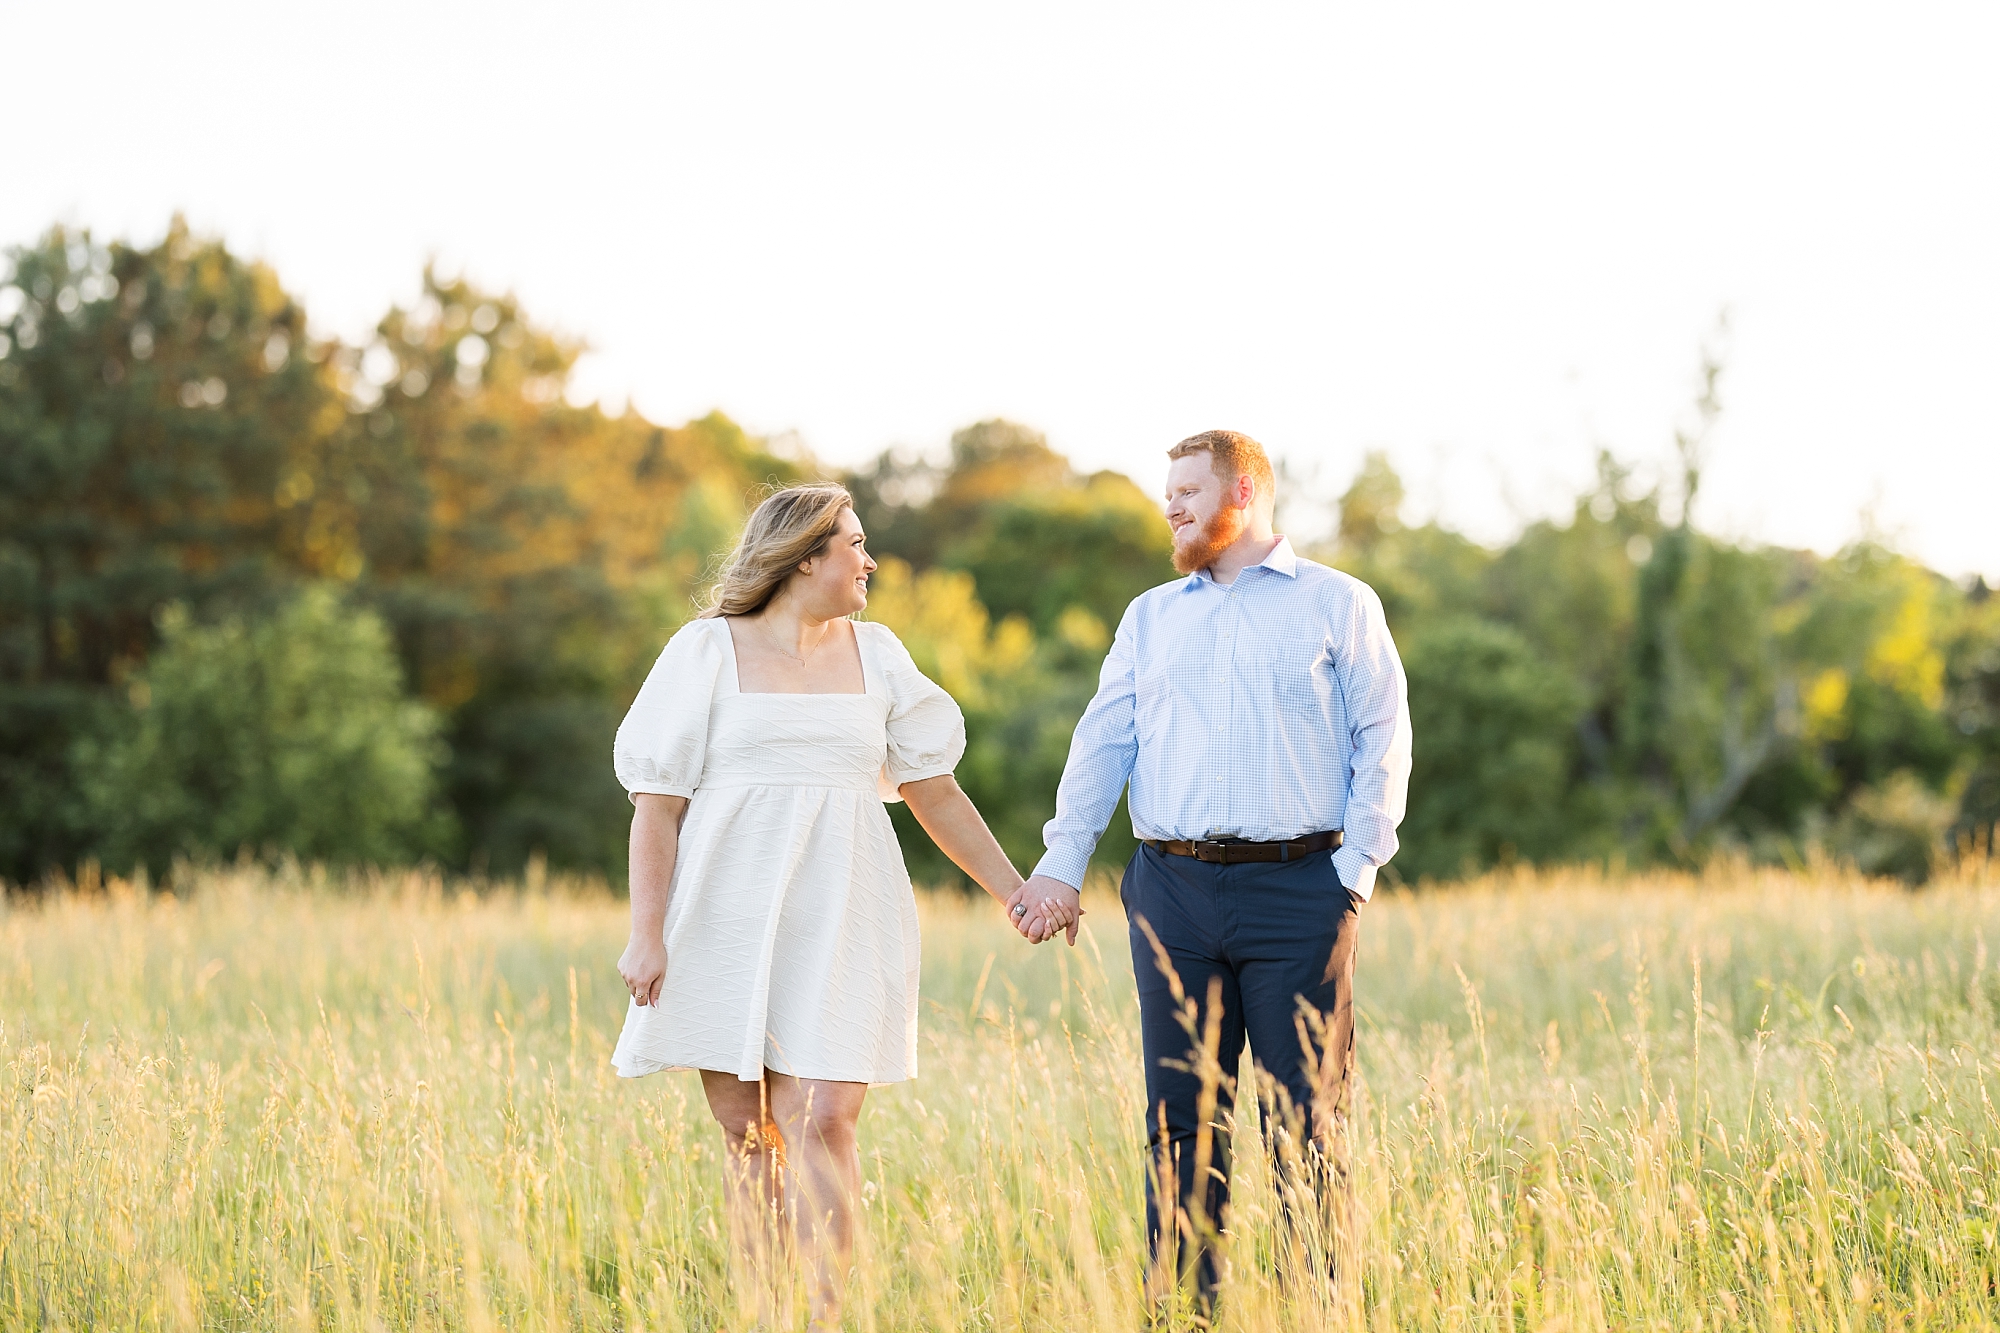 Golden Hour Sunset engagement photos at the NC Museum of Art in Raleigh | Raleigh NC Engagement Photographer